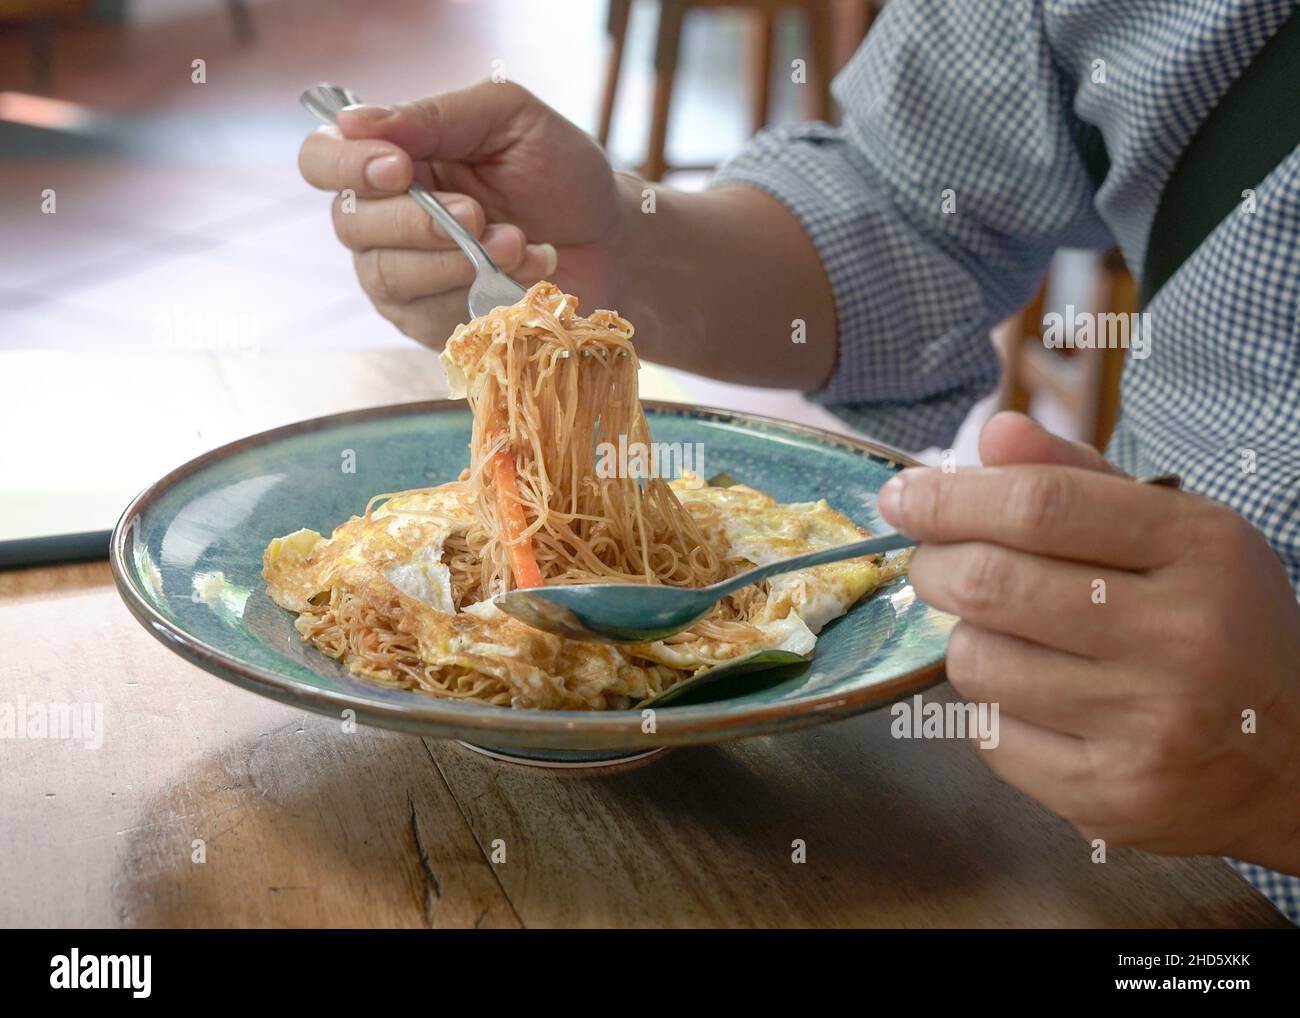 Man eating stir fry noodles wrapped with egg omellete. Close up view. Stock Photo